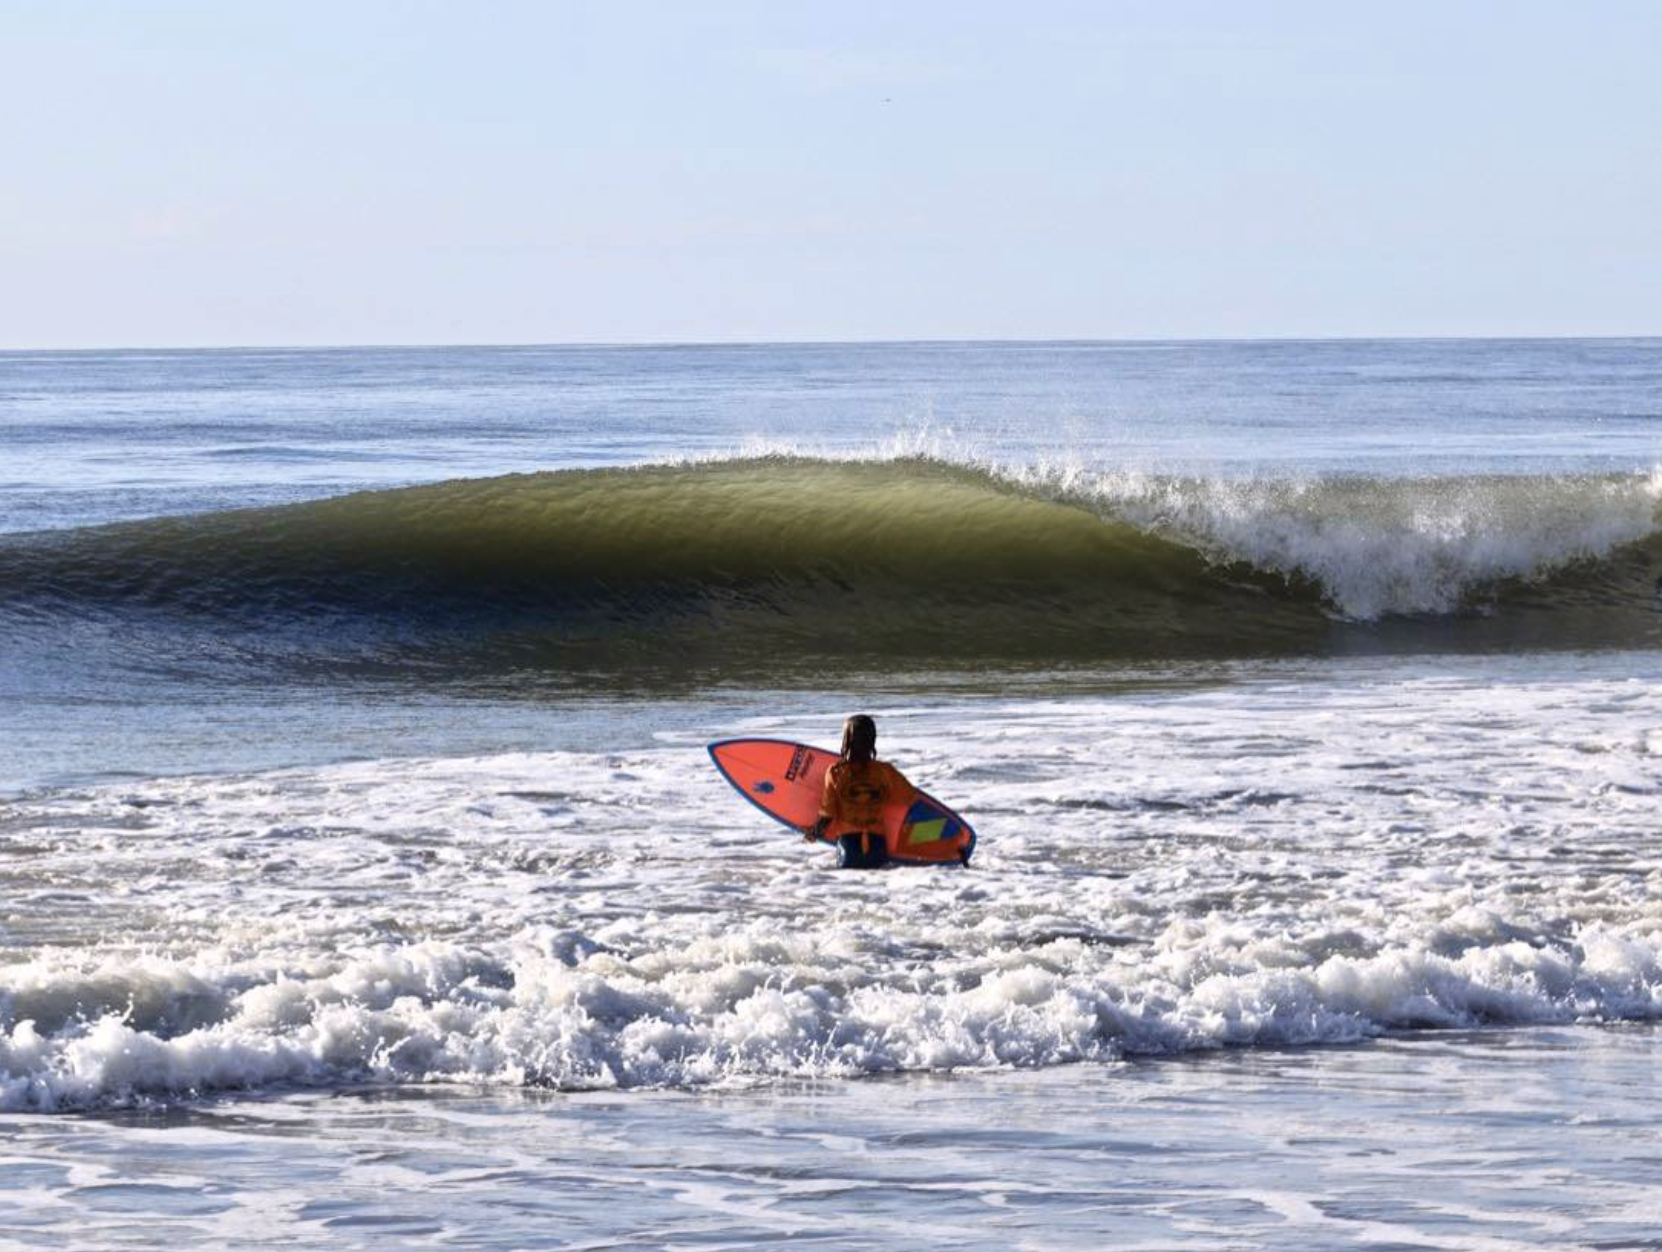 Eastern Surfing Association’s 2021 East Coast Surfing Championships